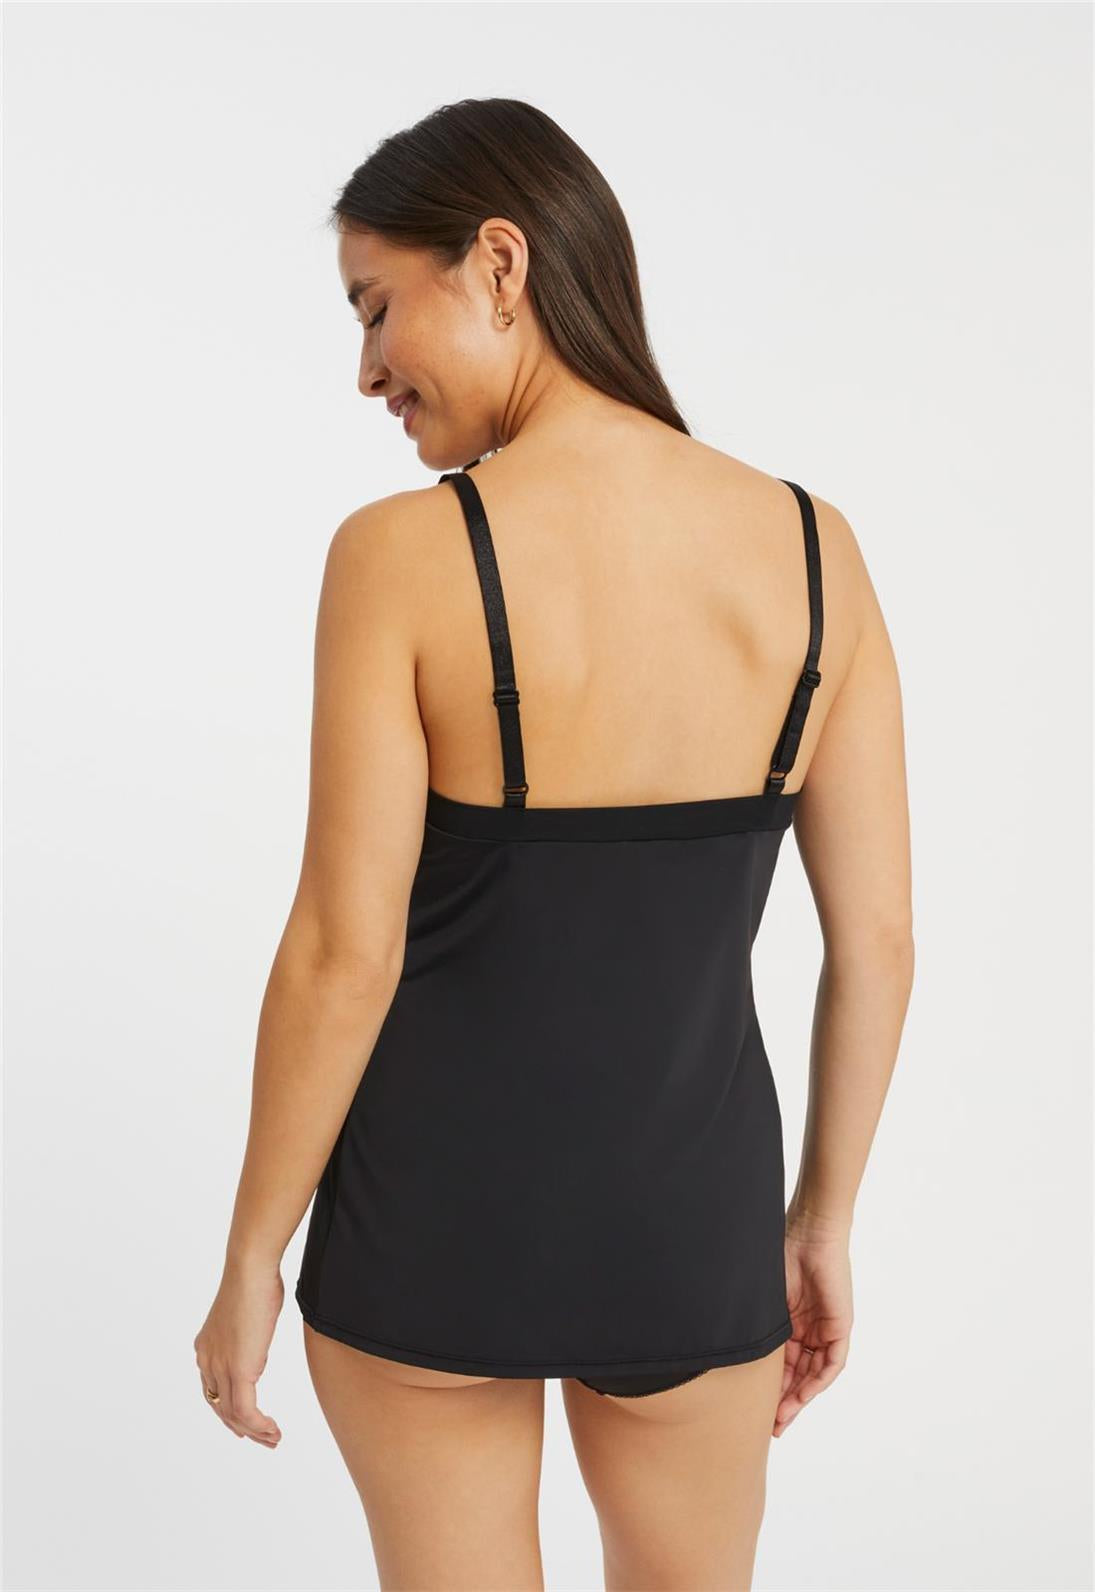 Camisole Slip - Black worn by model back view